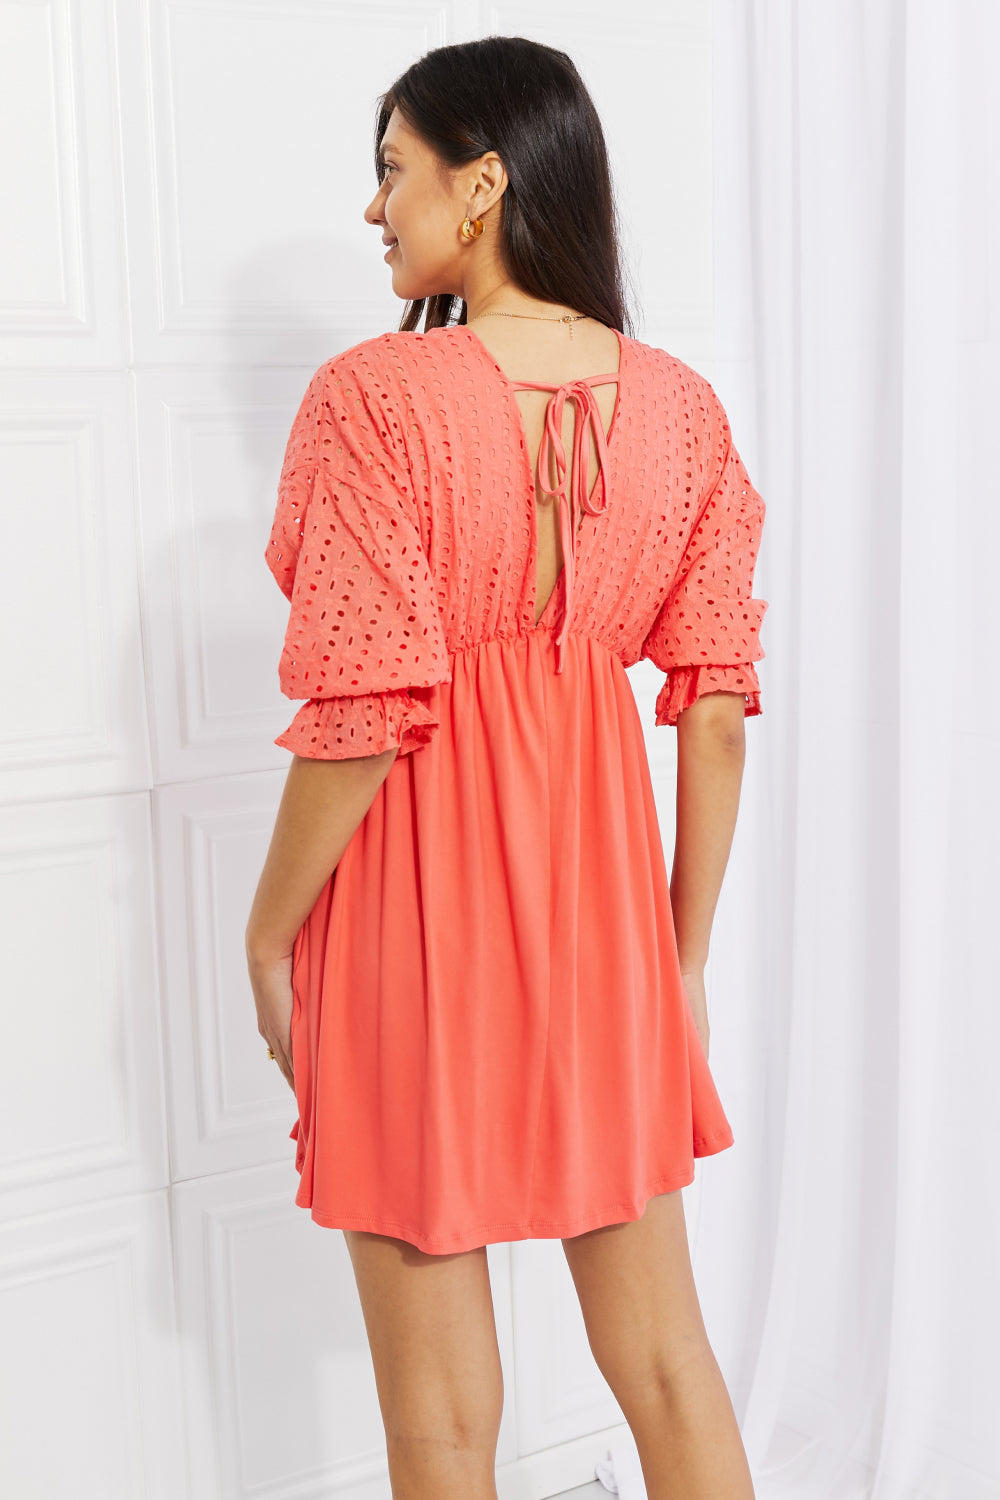 Our Everyday Dreams Eyelet Contrast Dress is straight out of dreamland. The contrasting textures on the bodice and skirt create a casual but cute look that is perfect for wearing all season long, and the open back shows off a bit of skin for a summery touch. S- XL